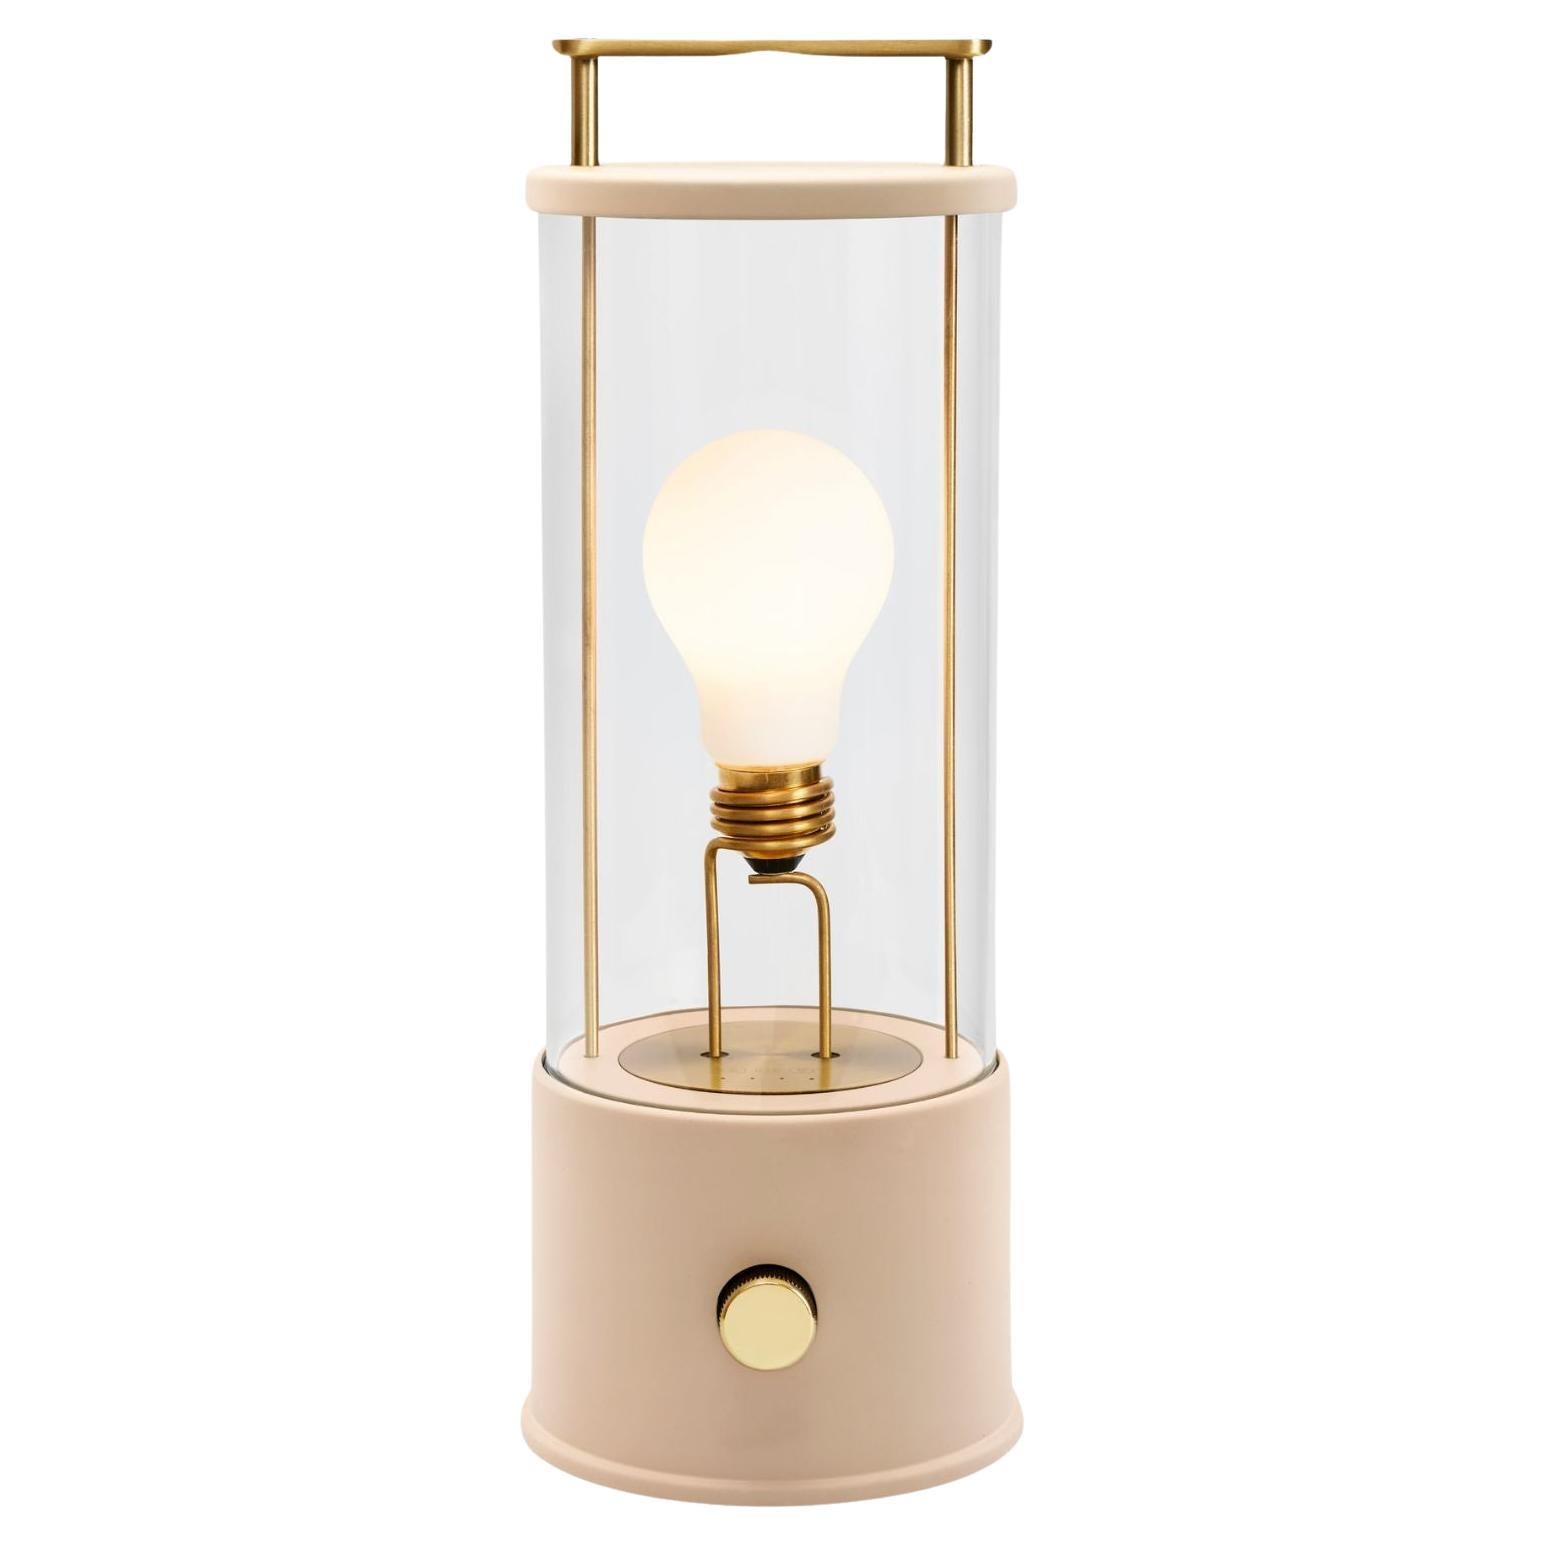 'The Muse' Portable Lamp in Plaster Pink by Farrow & Ball for Tala For Sale